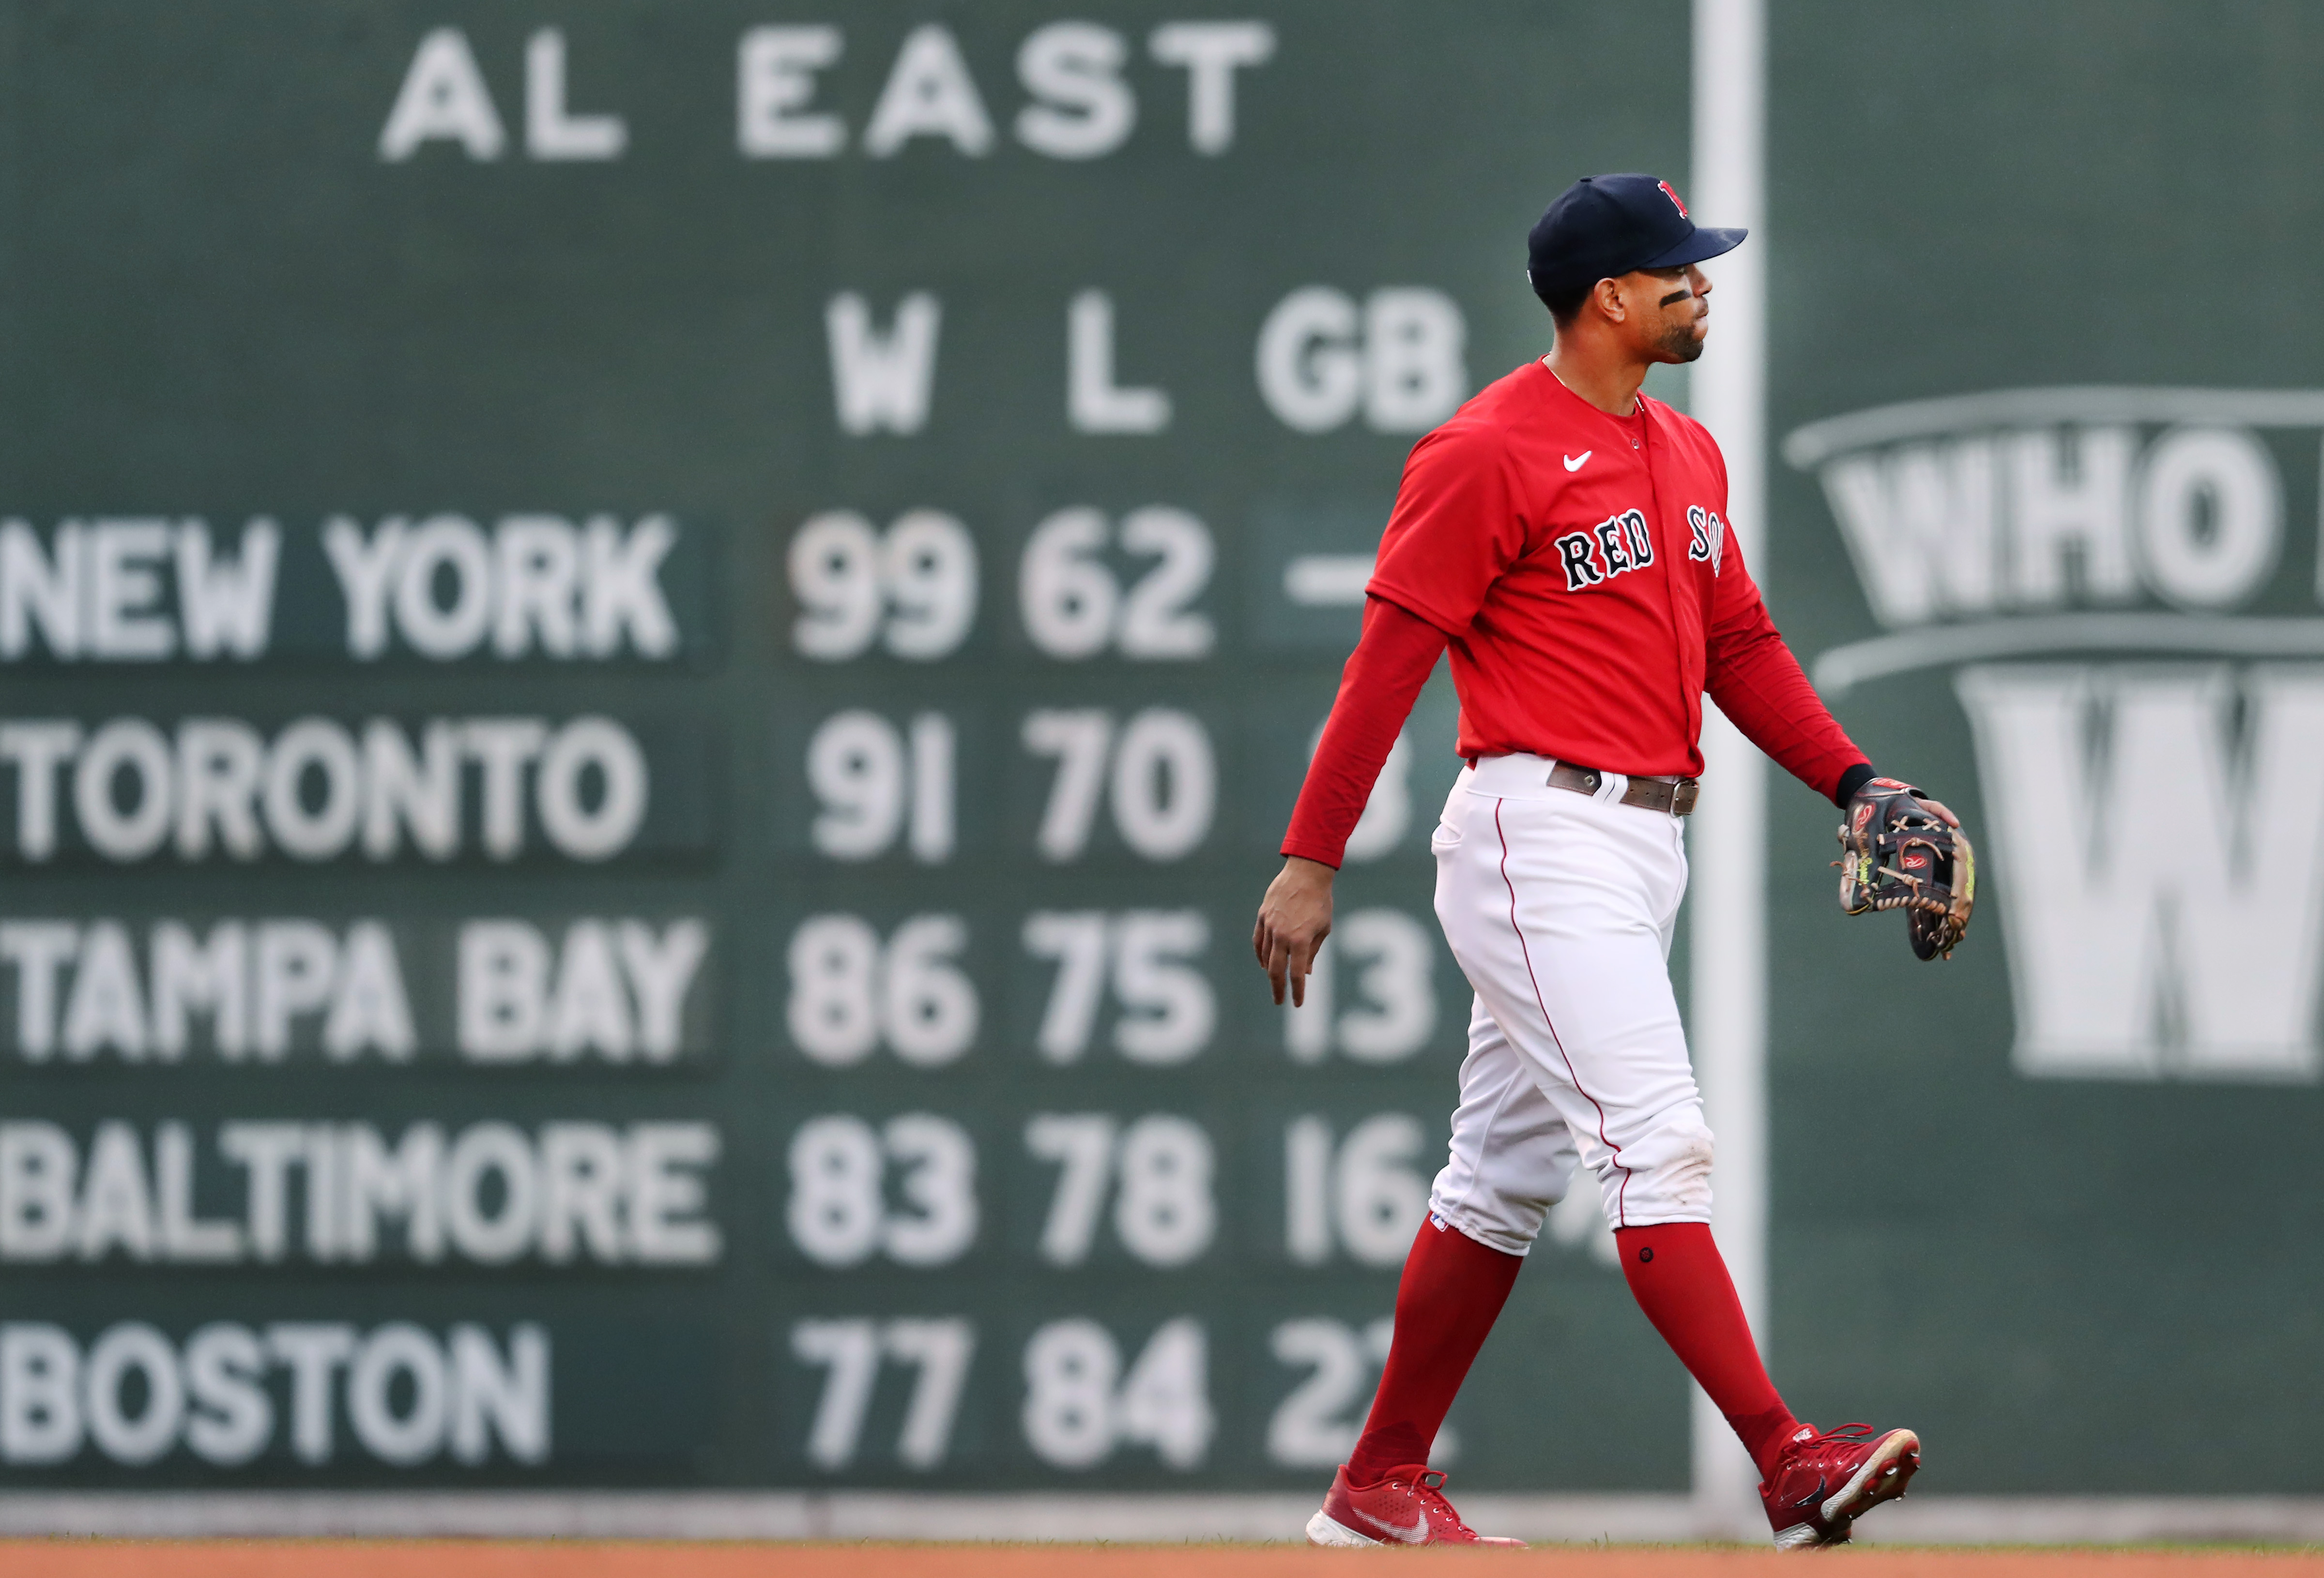 Xander Bogaerts is getting plenty of free agent interest, but the